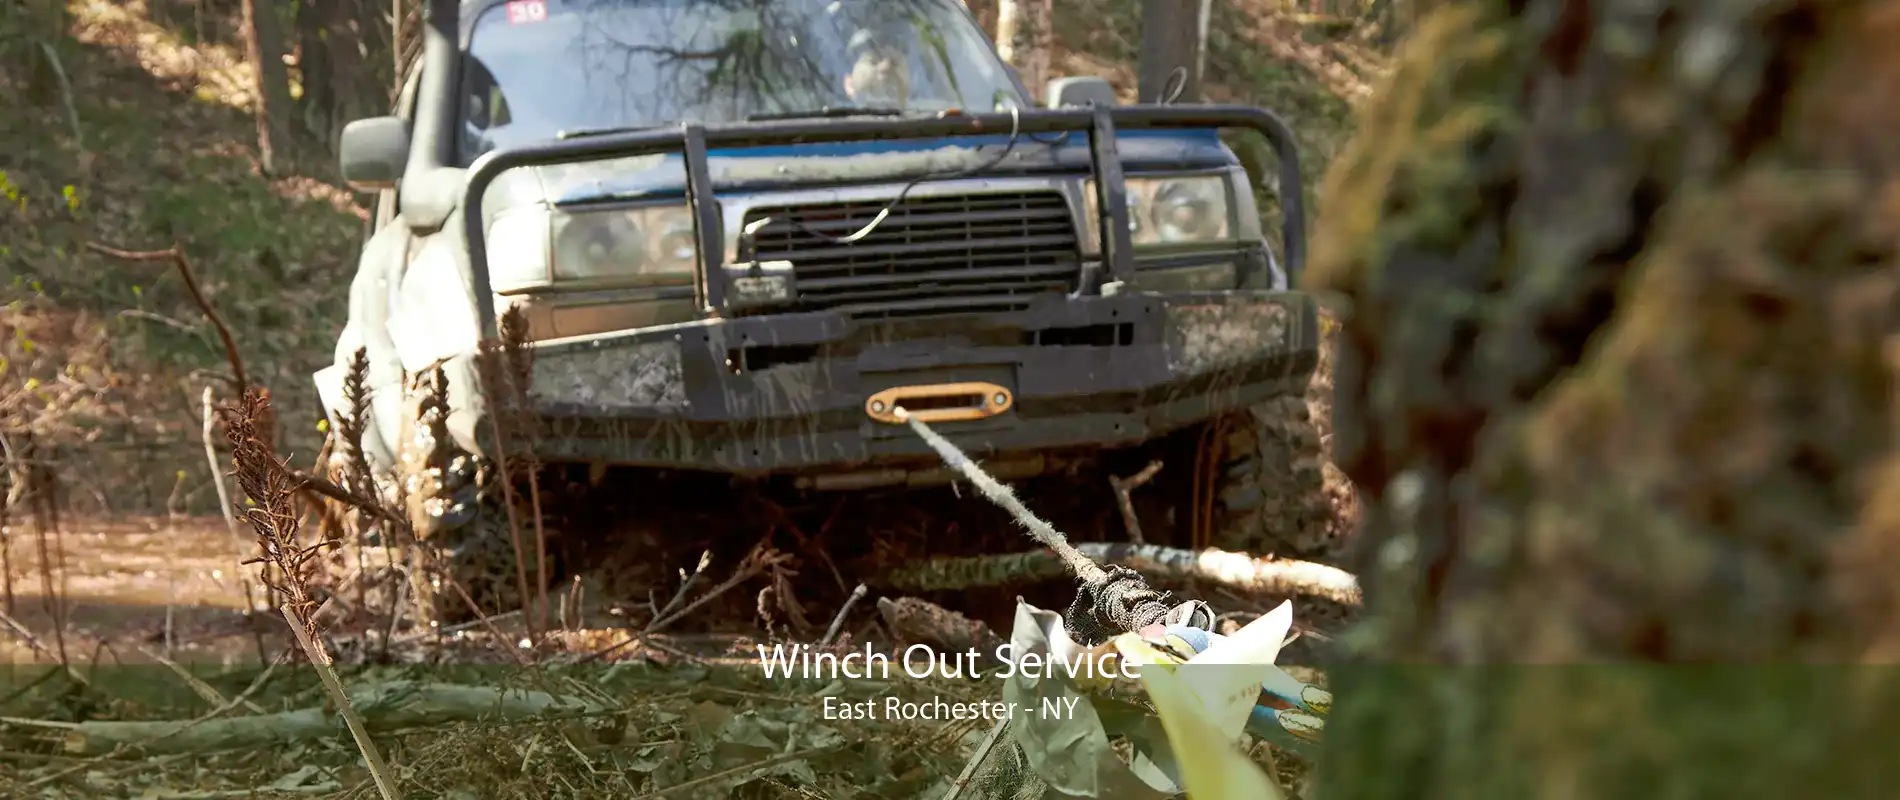 Winch Out Service East Rochester - NY